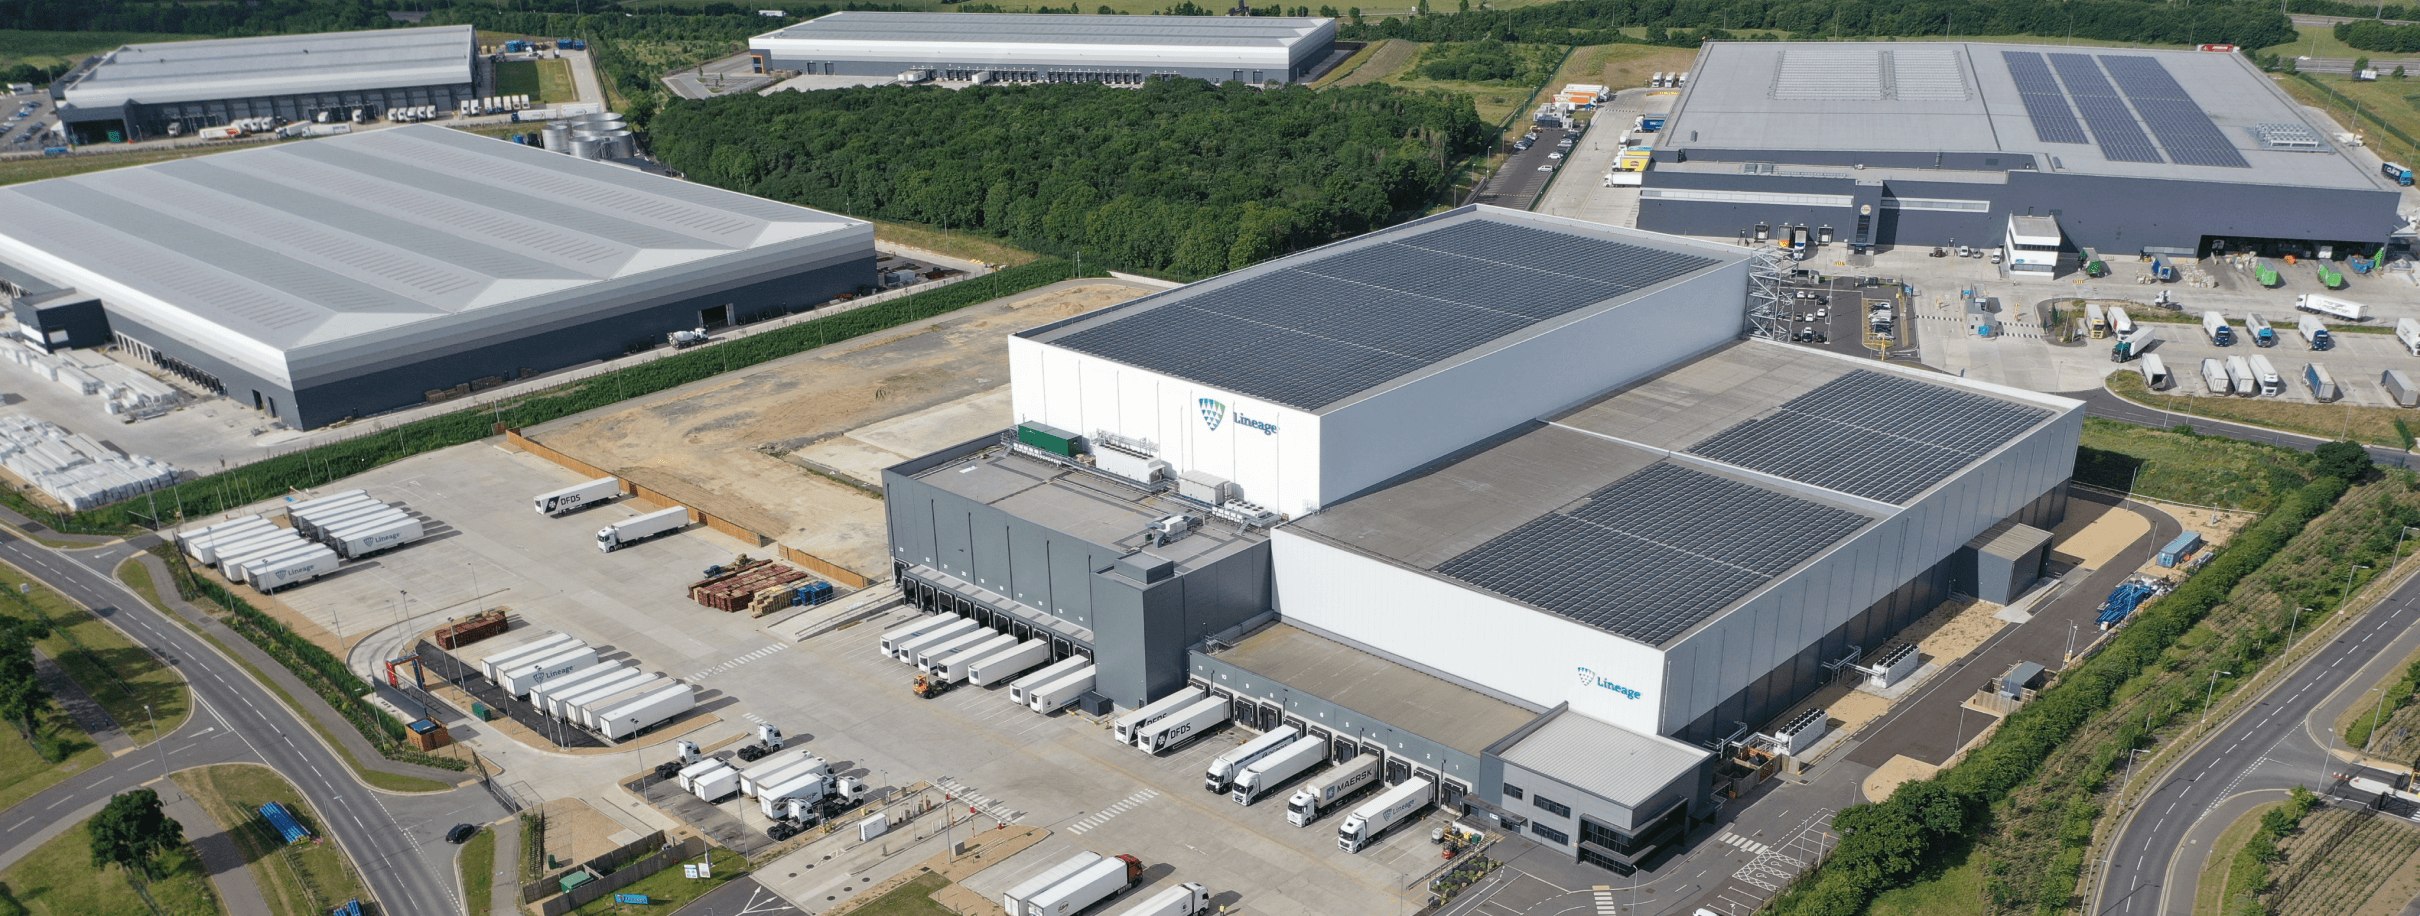 Lineage warehouse as seen from the sky